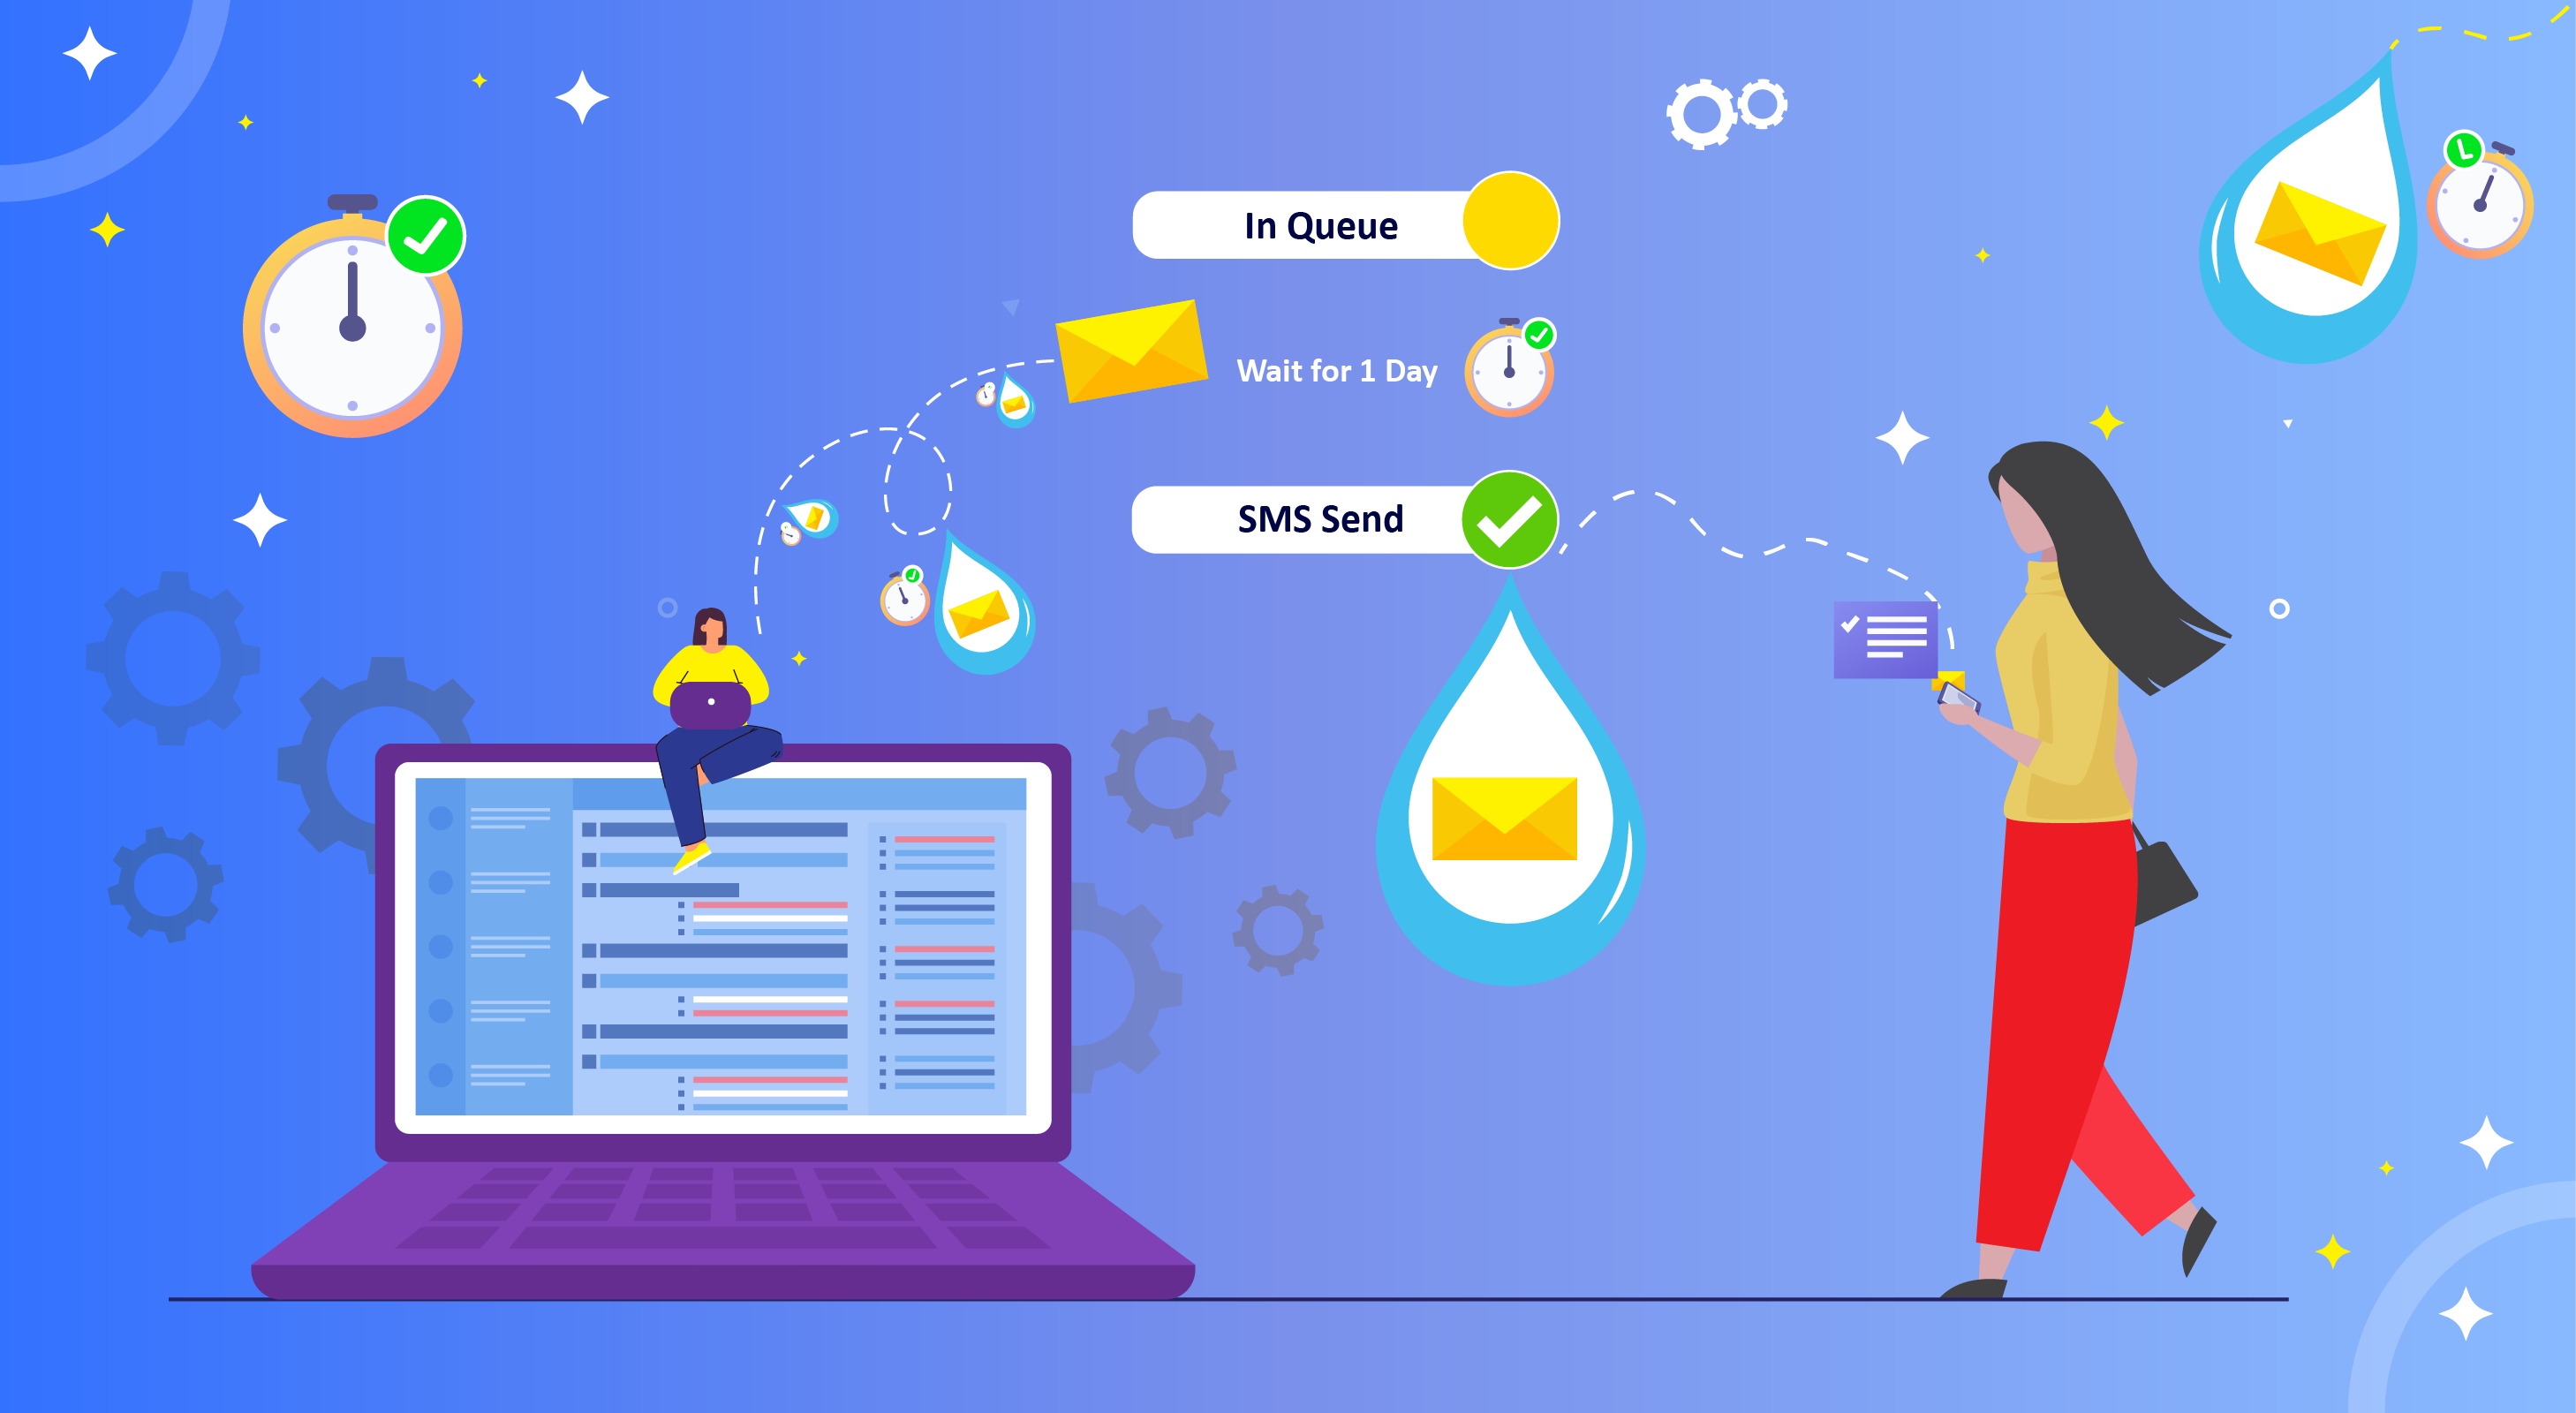 Drip SMS use cases